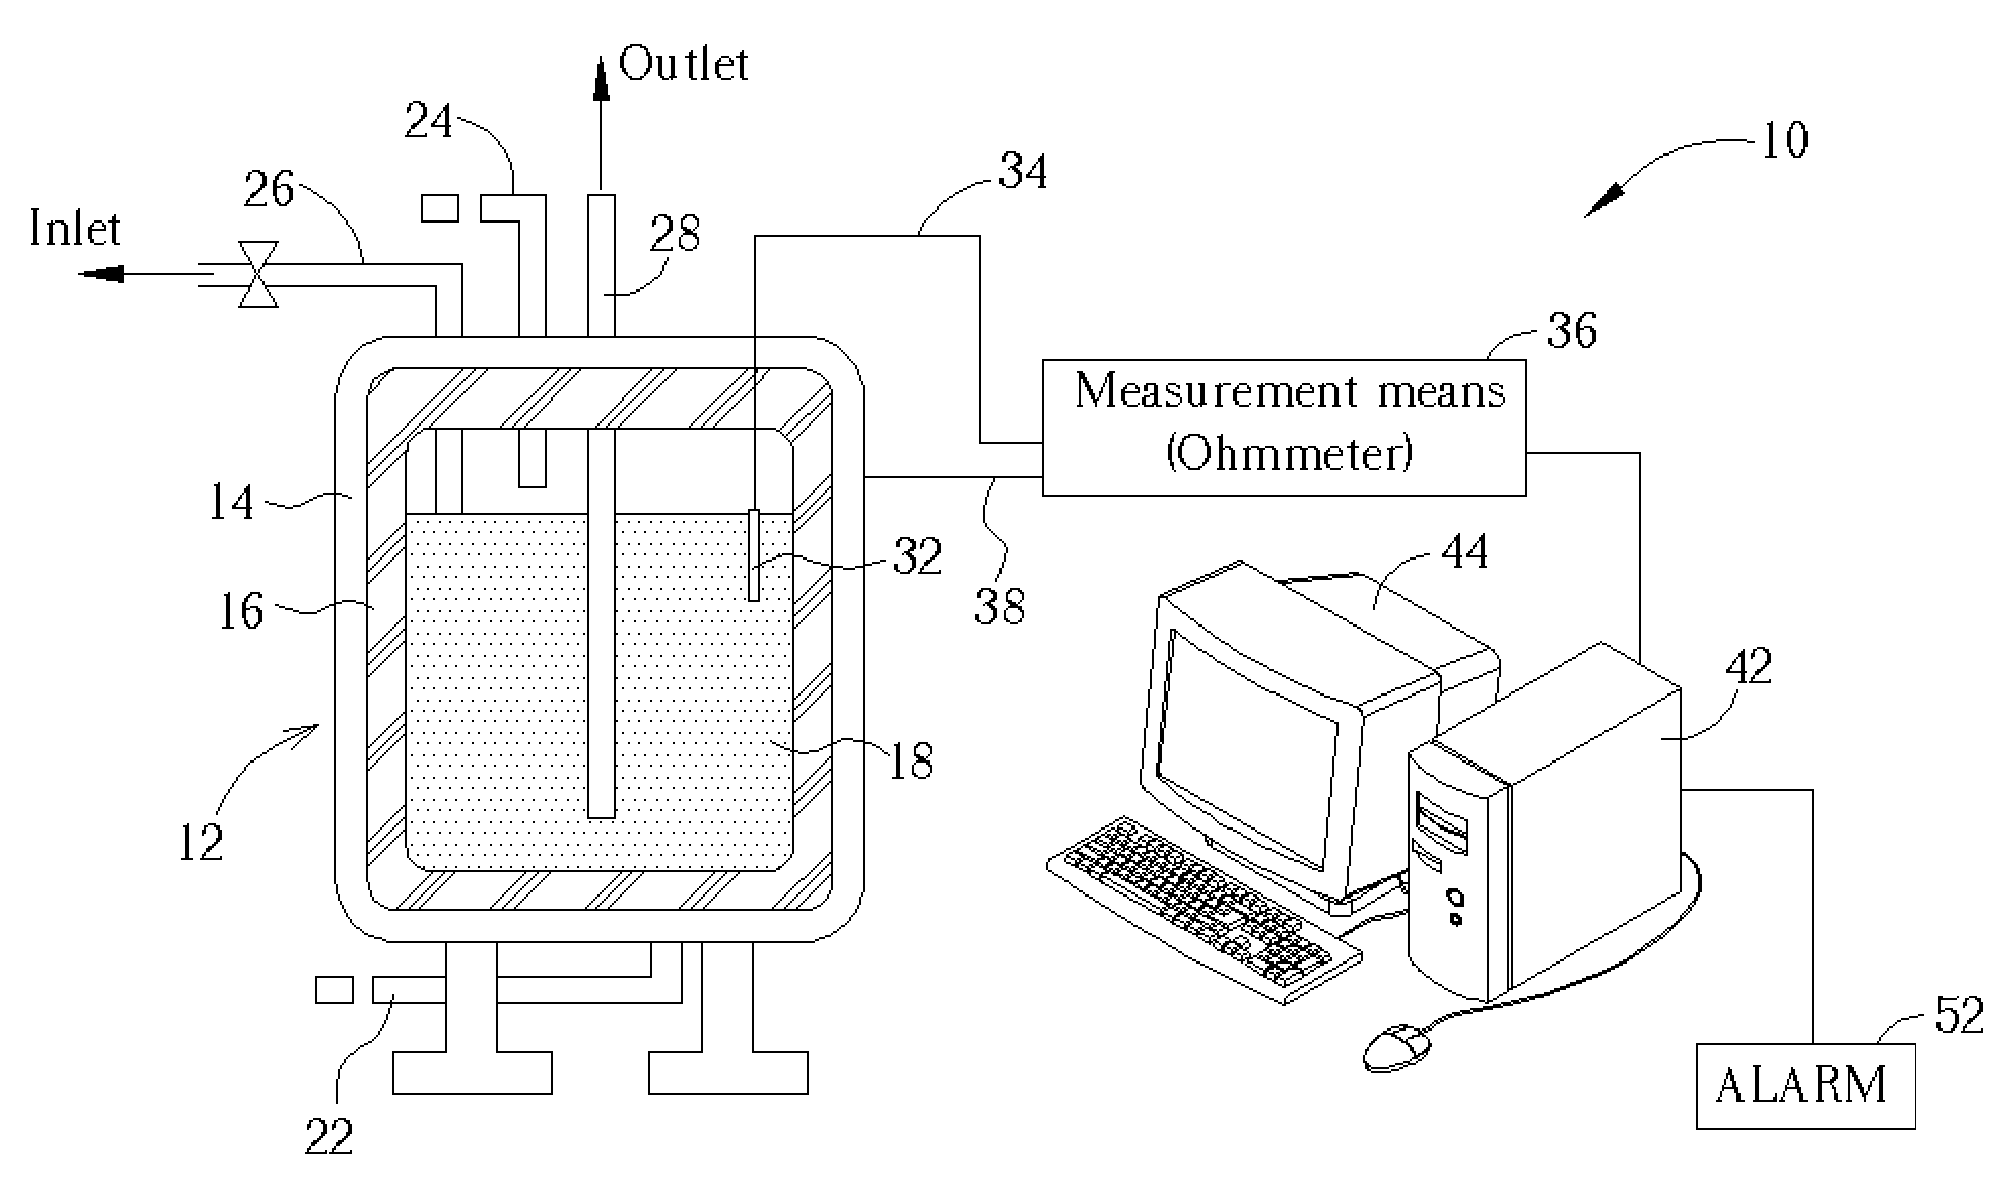 In-situ monitoring and controlling system for chemical vessels or tanks